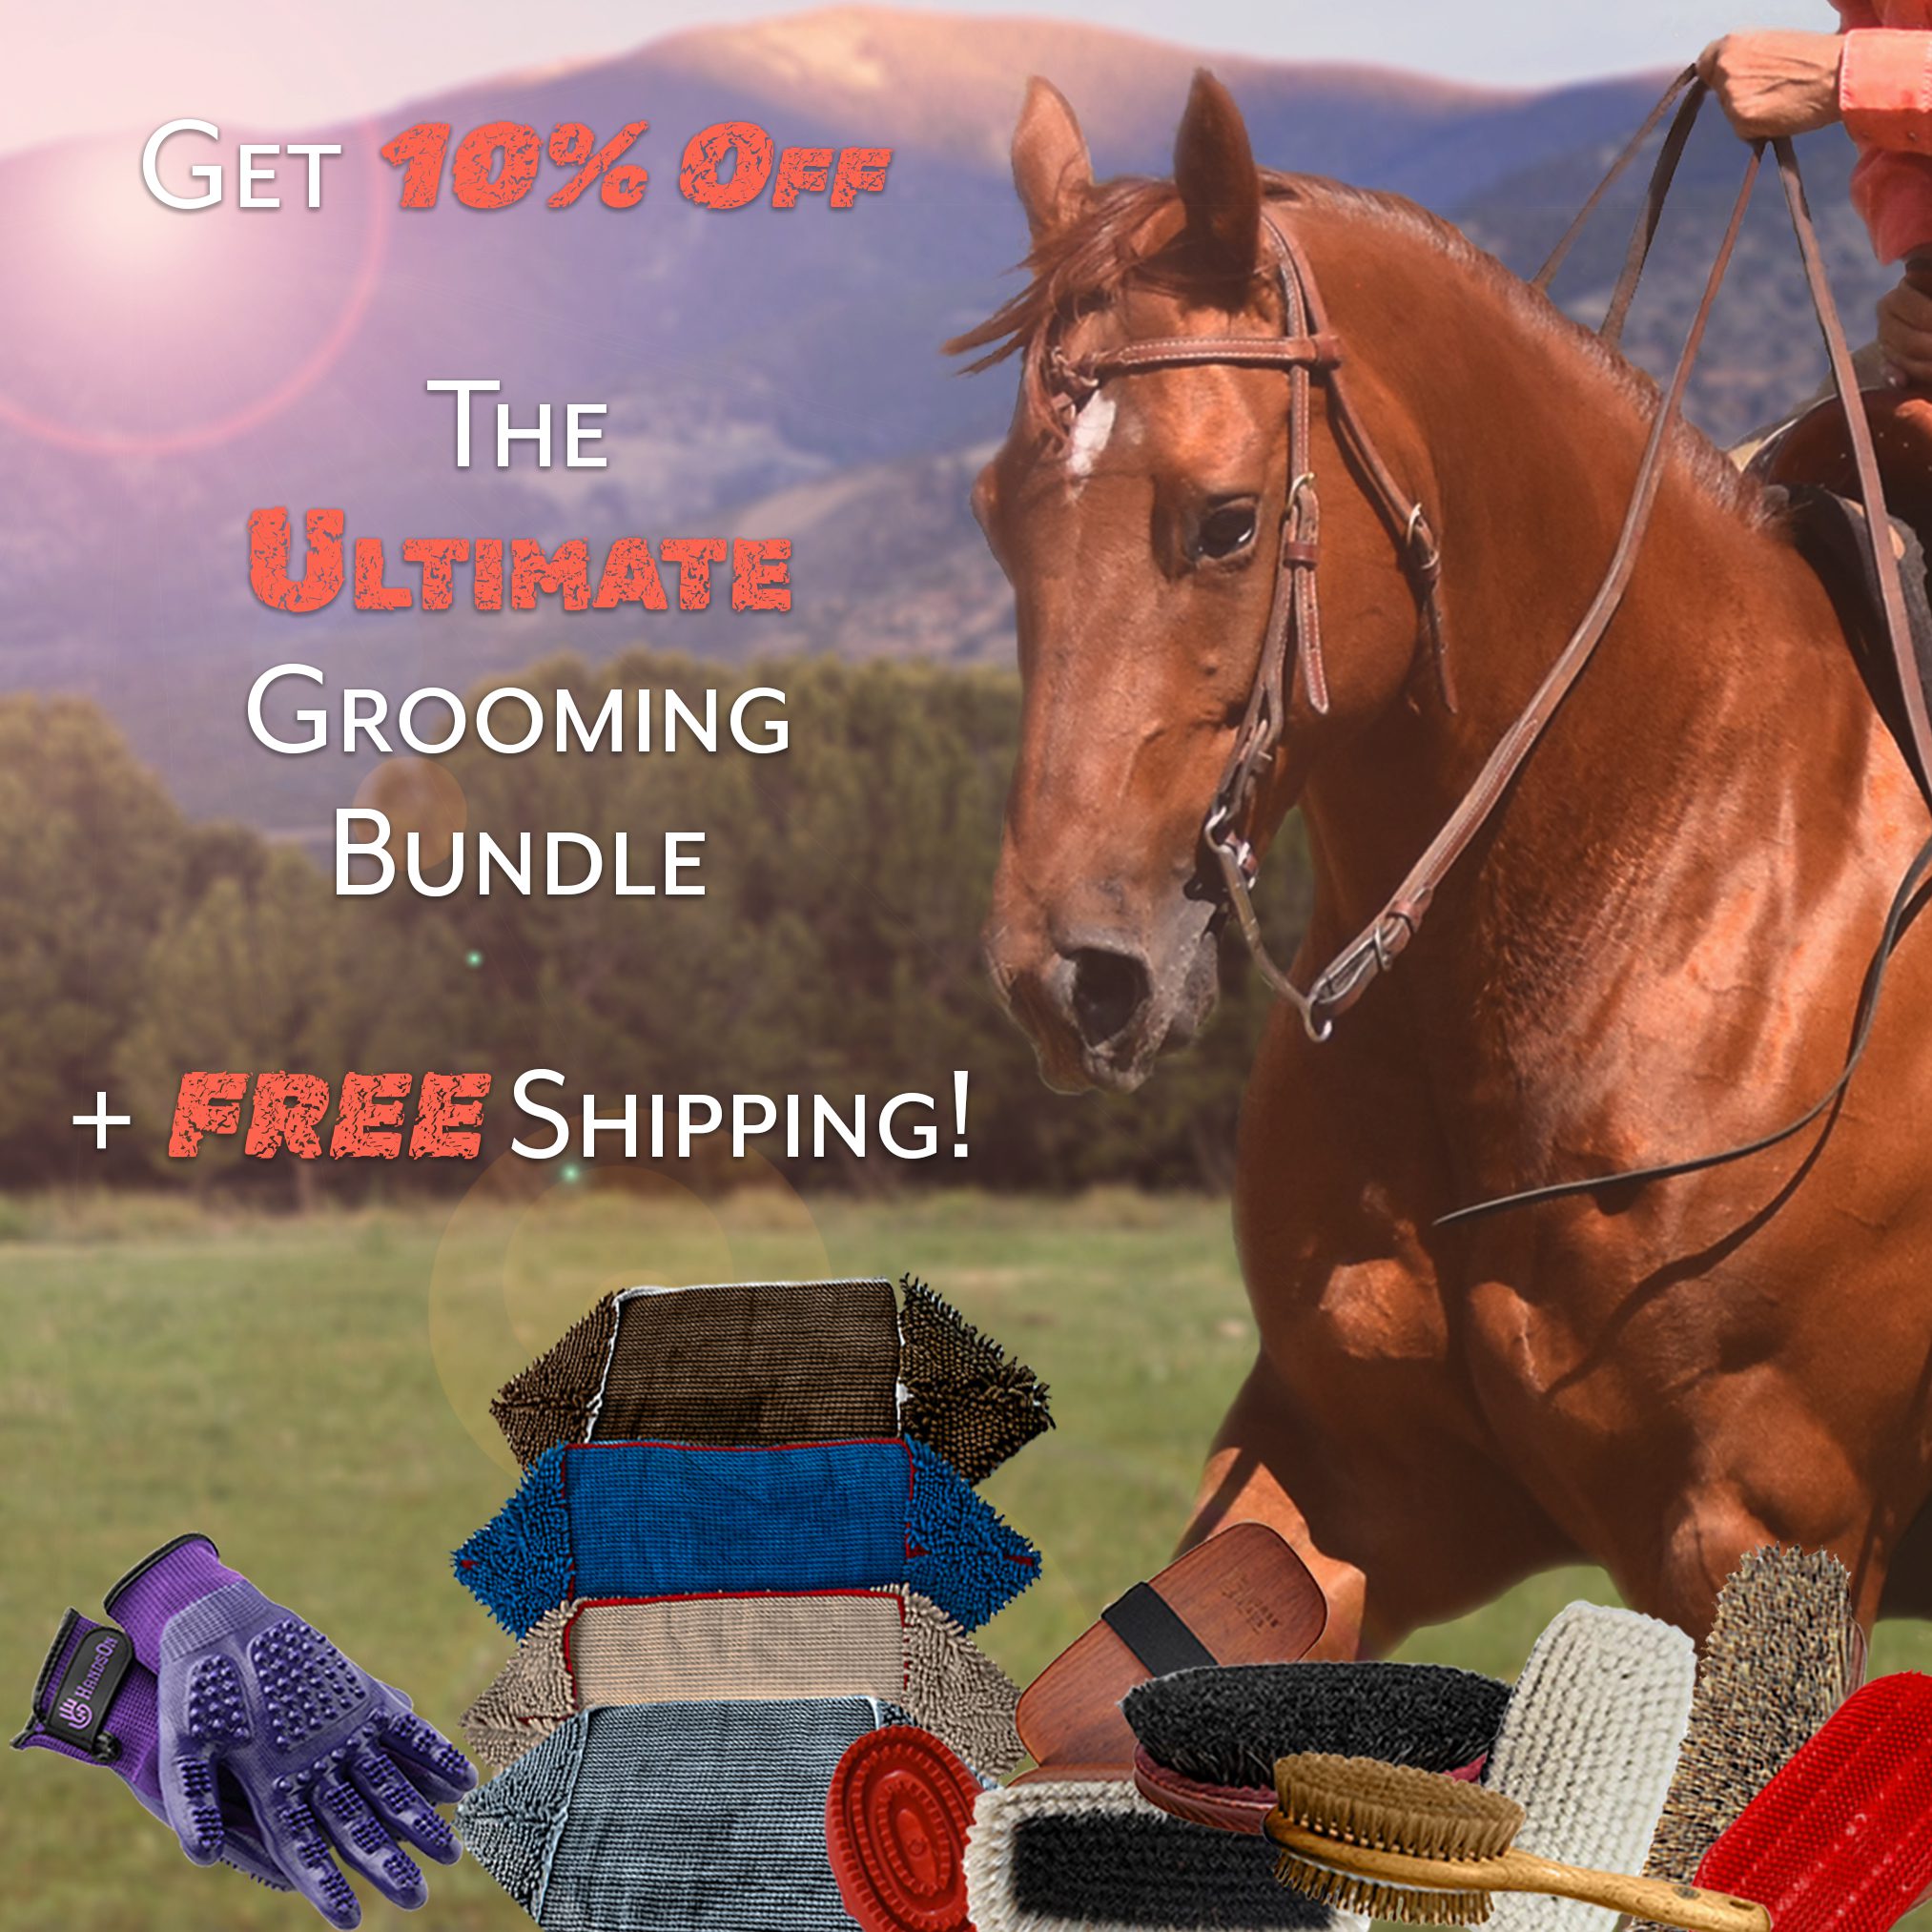 Get 10% off the Ultimate Grooming Bundle + Free Shipping!